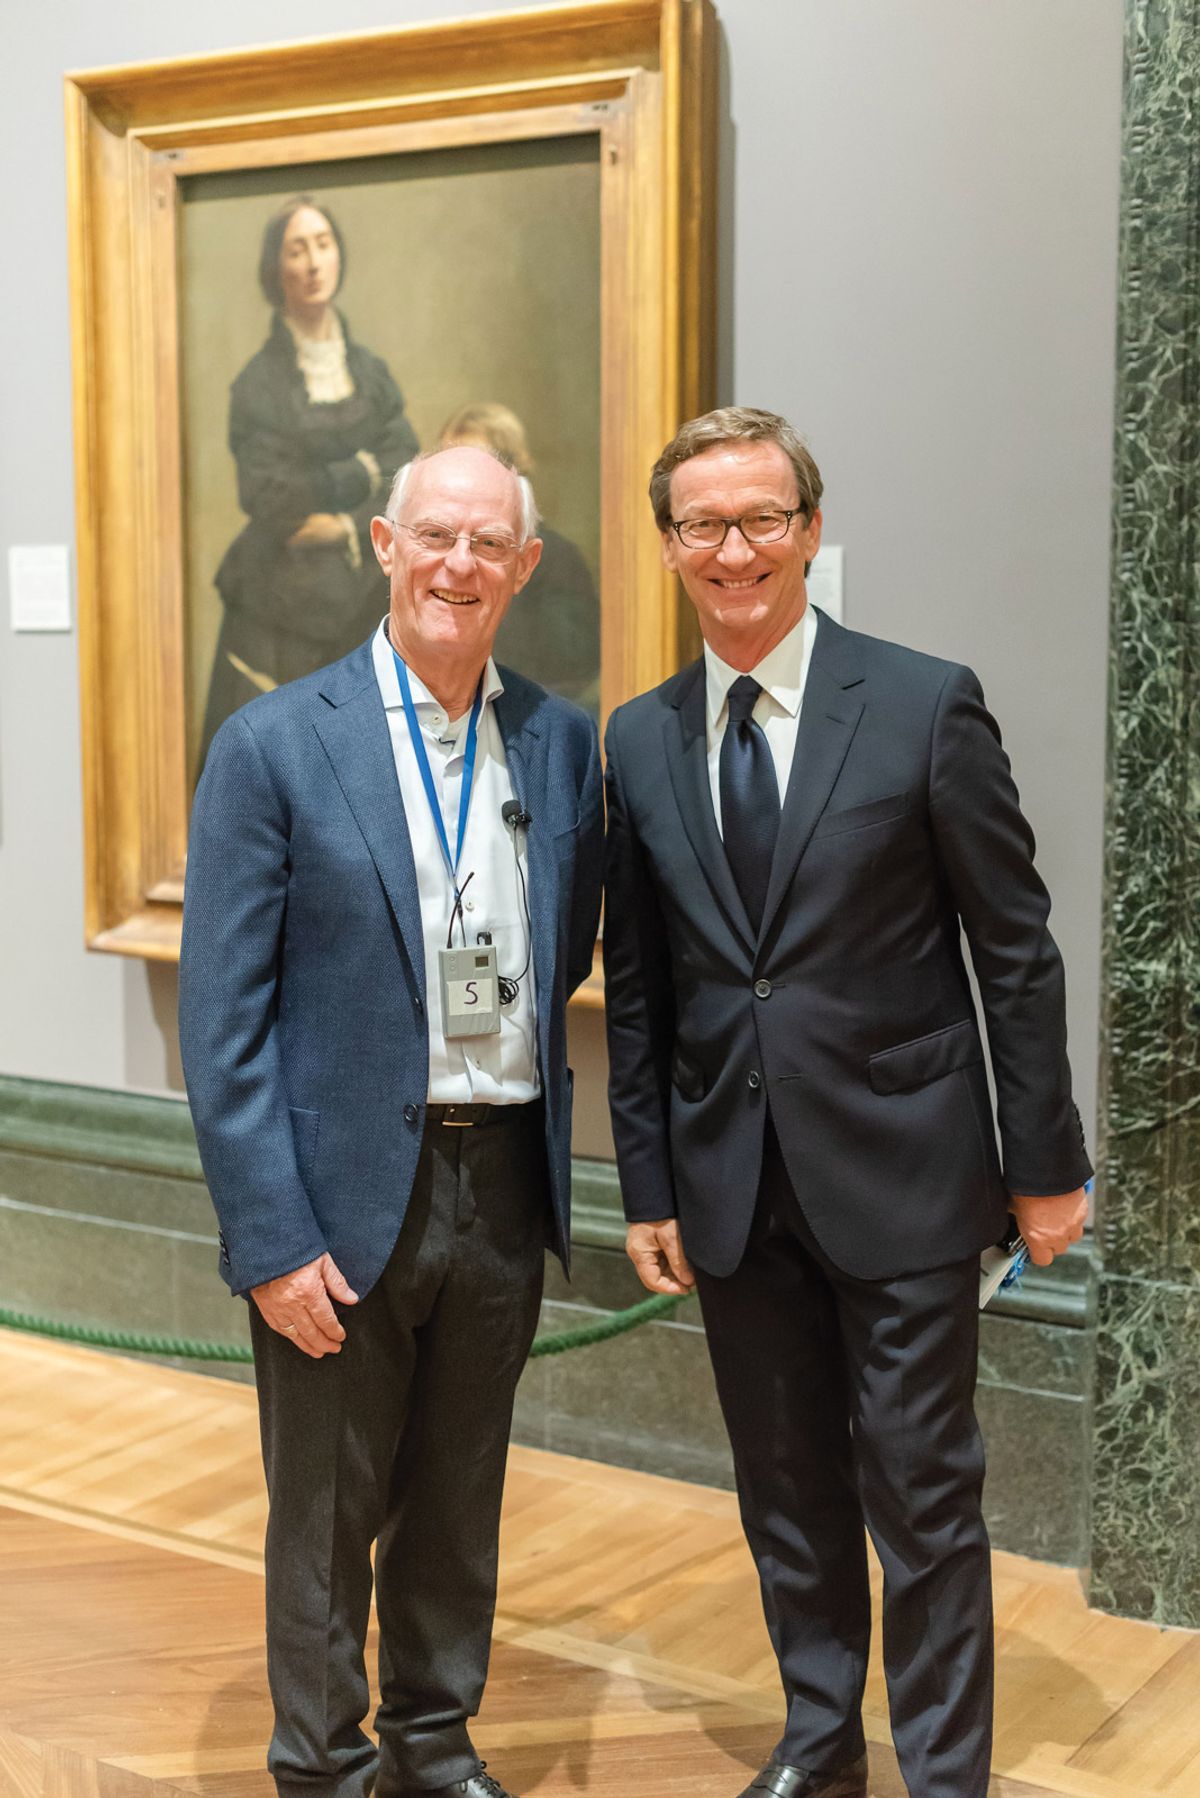 The answer lies in the art:Tony Cragg and Thaddaeus Ropac discussed international diplomacy and Seurat at the National Gallery Courtesy of Galerie Thaddaeus Ropac